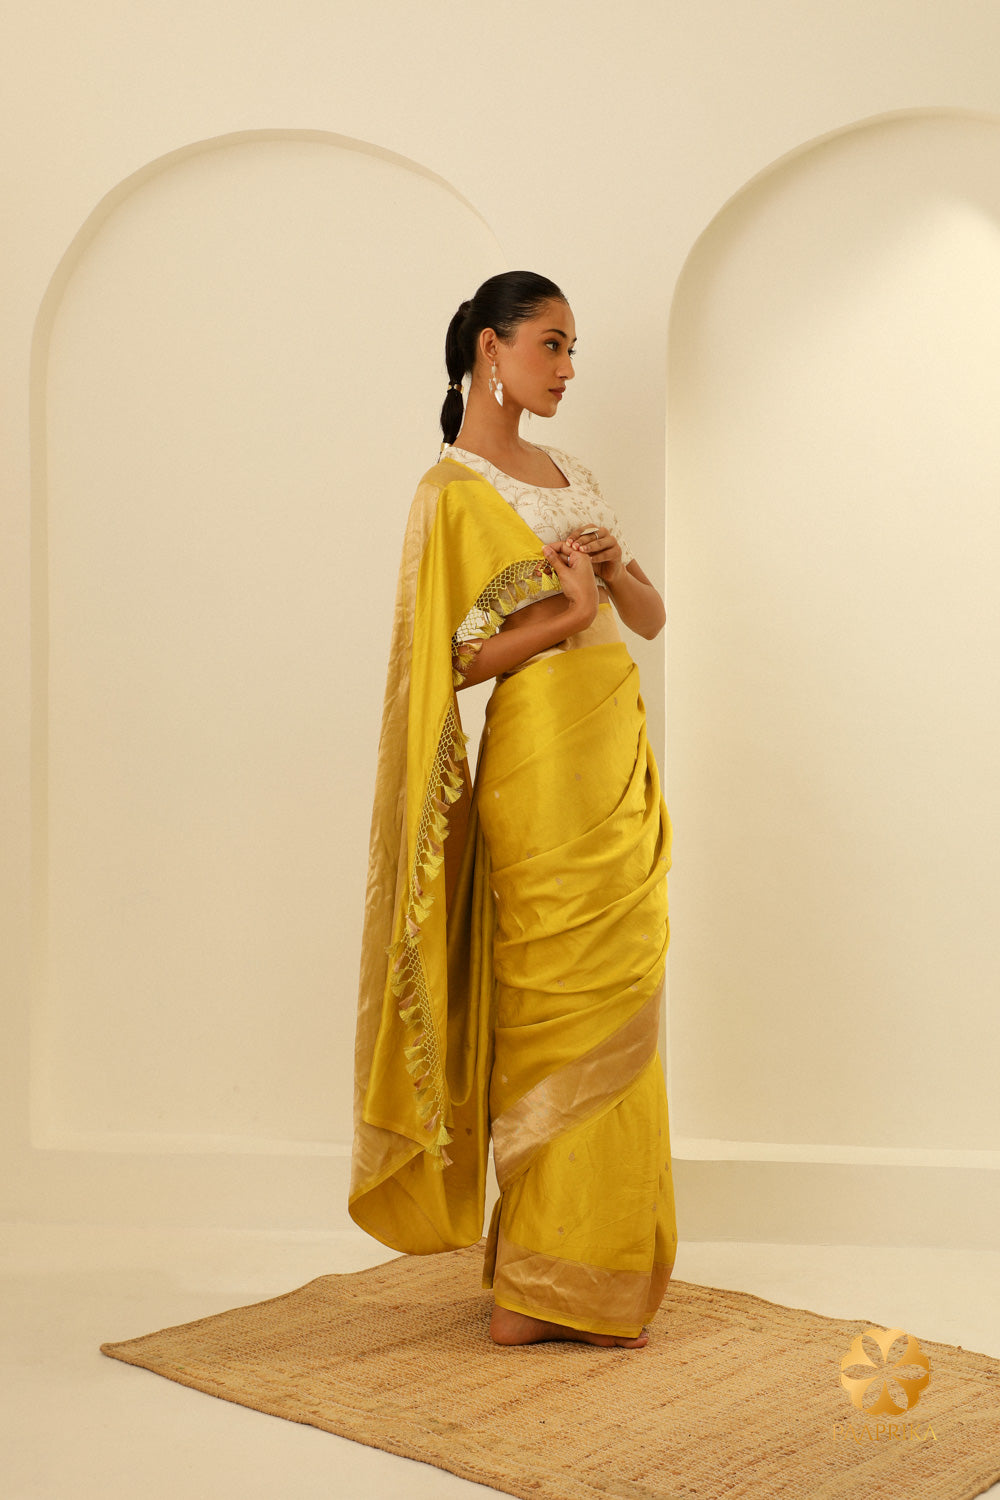 A closer look at the scattered butis on the saree, creating an eye-catching and contemporary pattern.